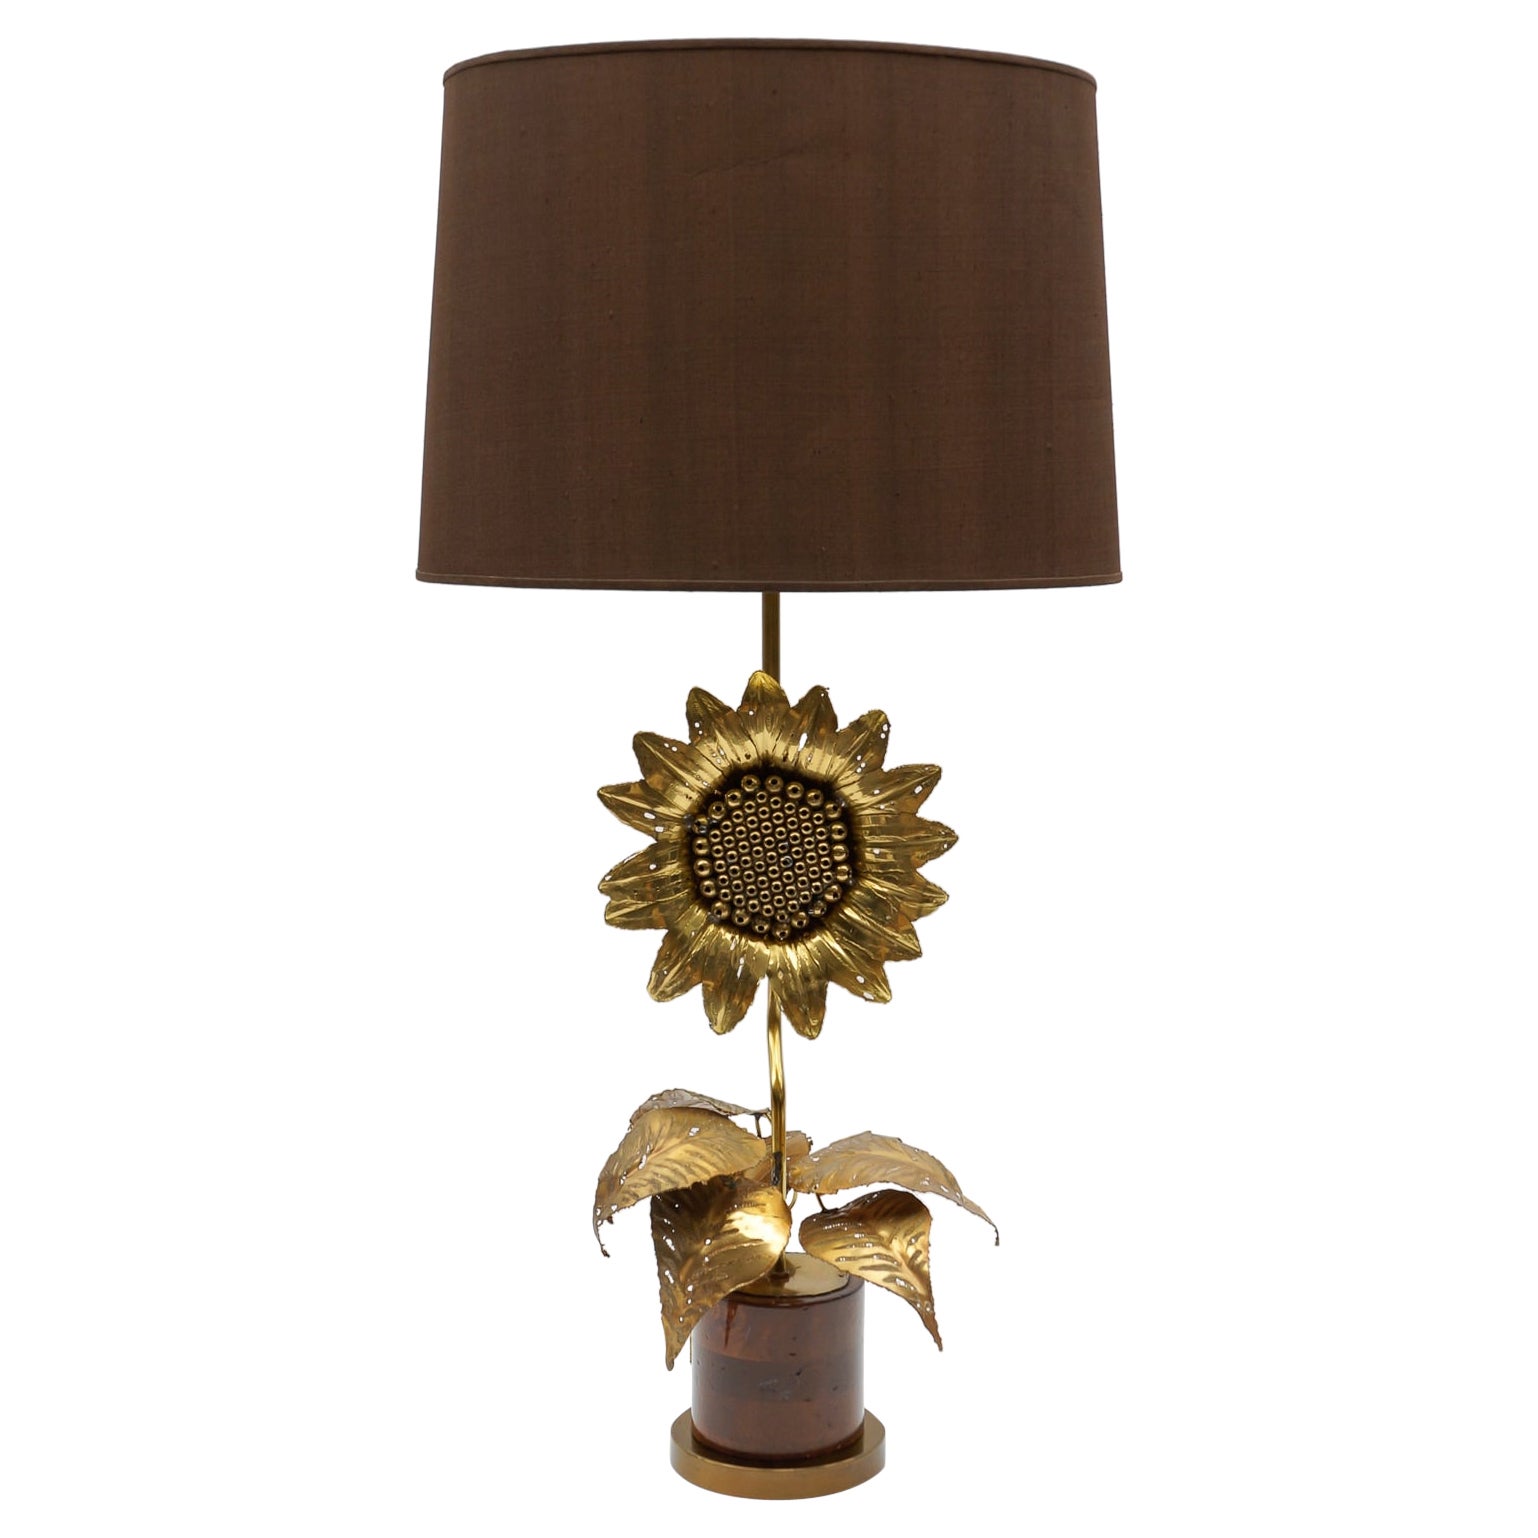 Mid-Century Modern Sunflower Table Lamp made in Brass and Wood, 1960s  